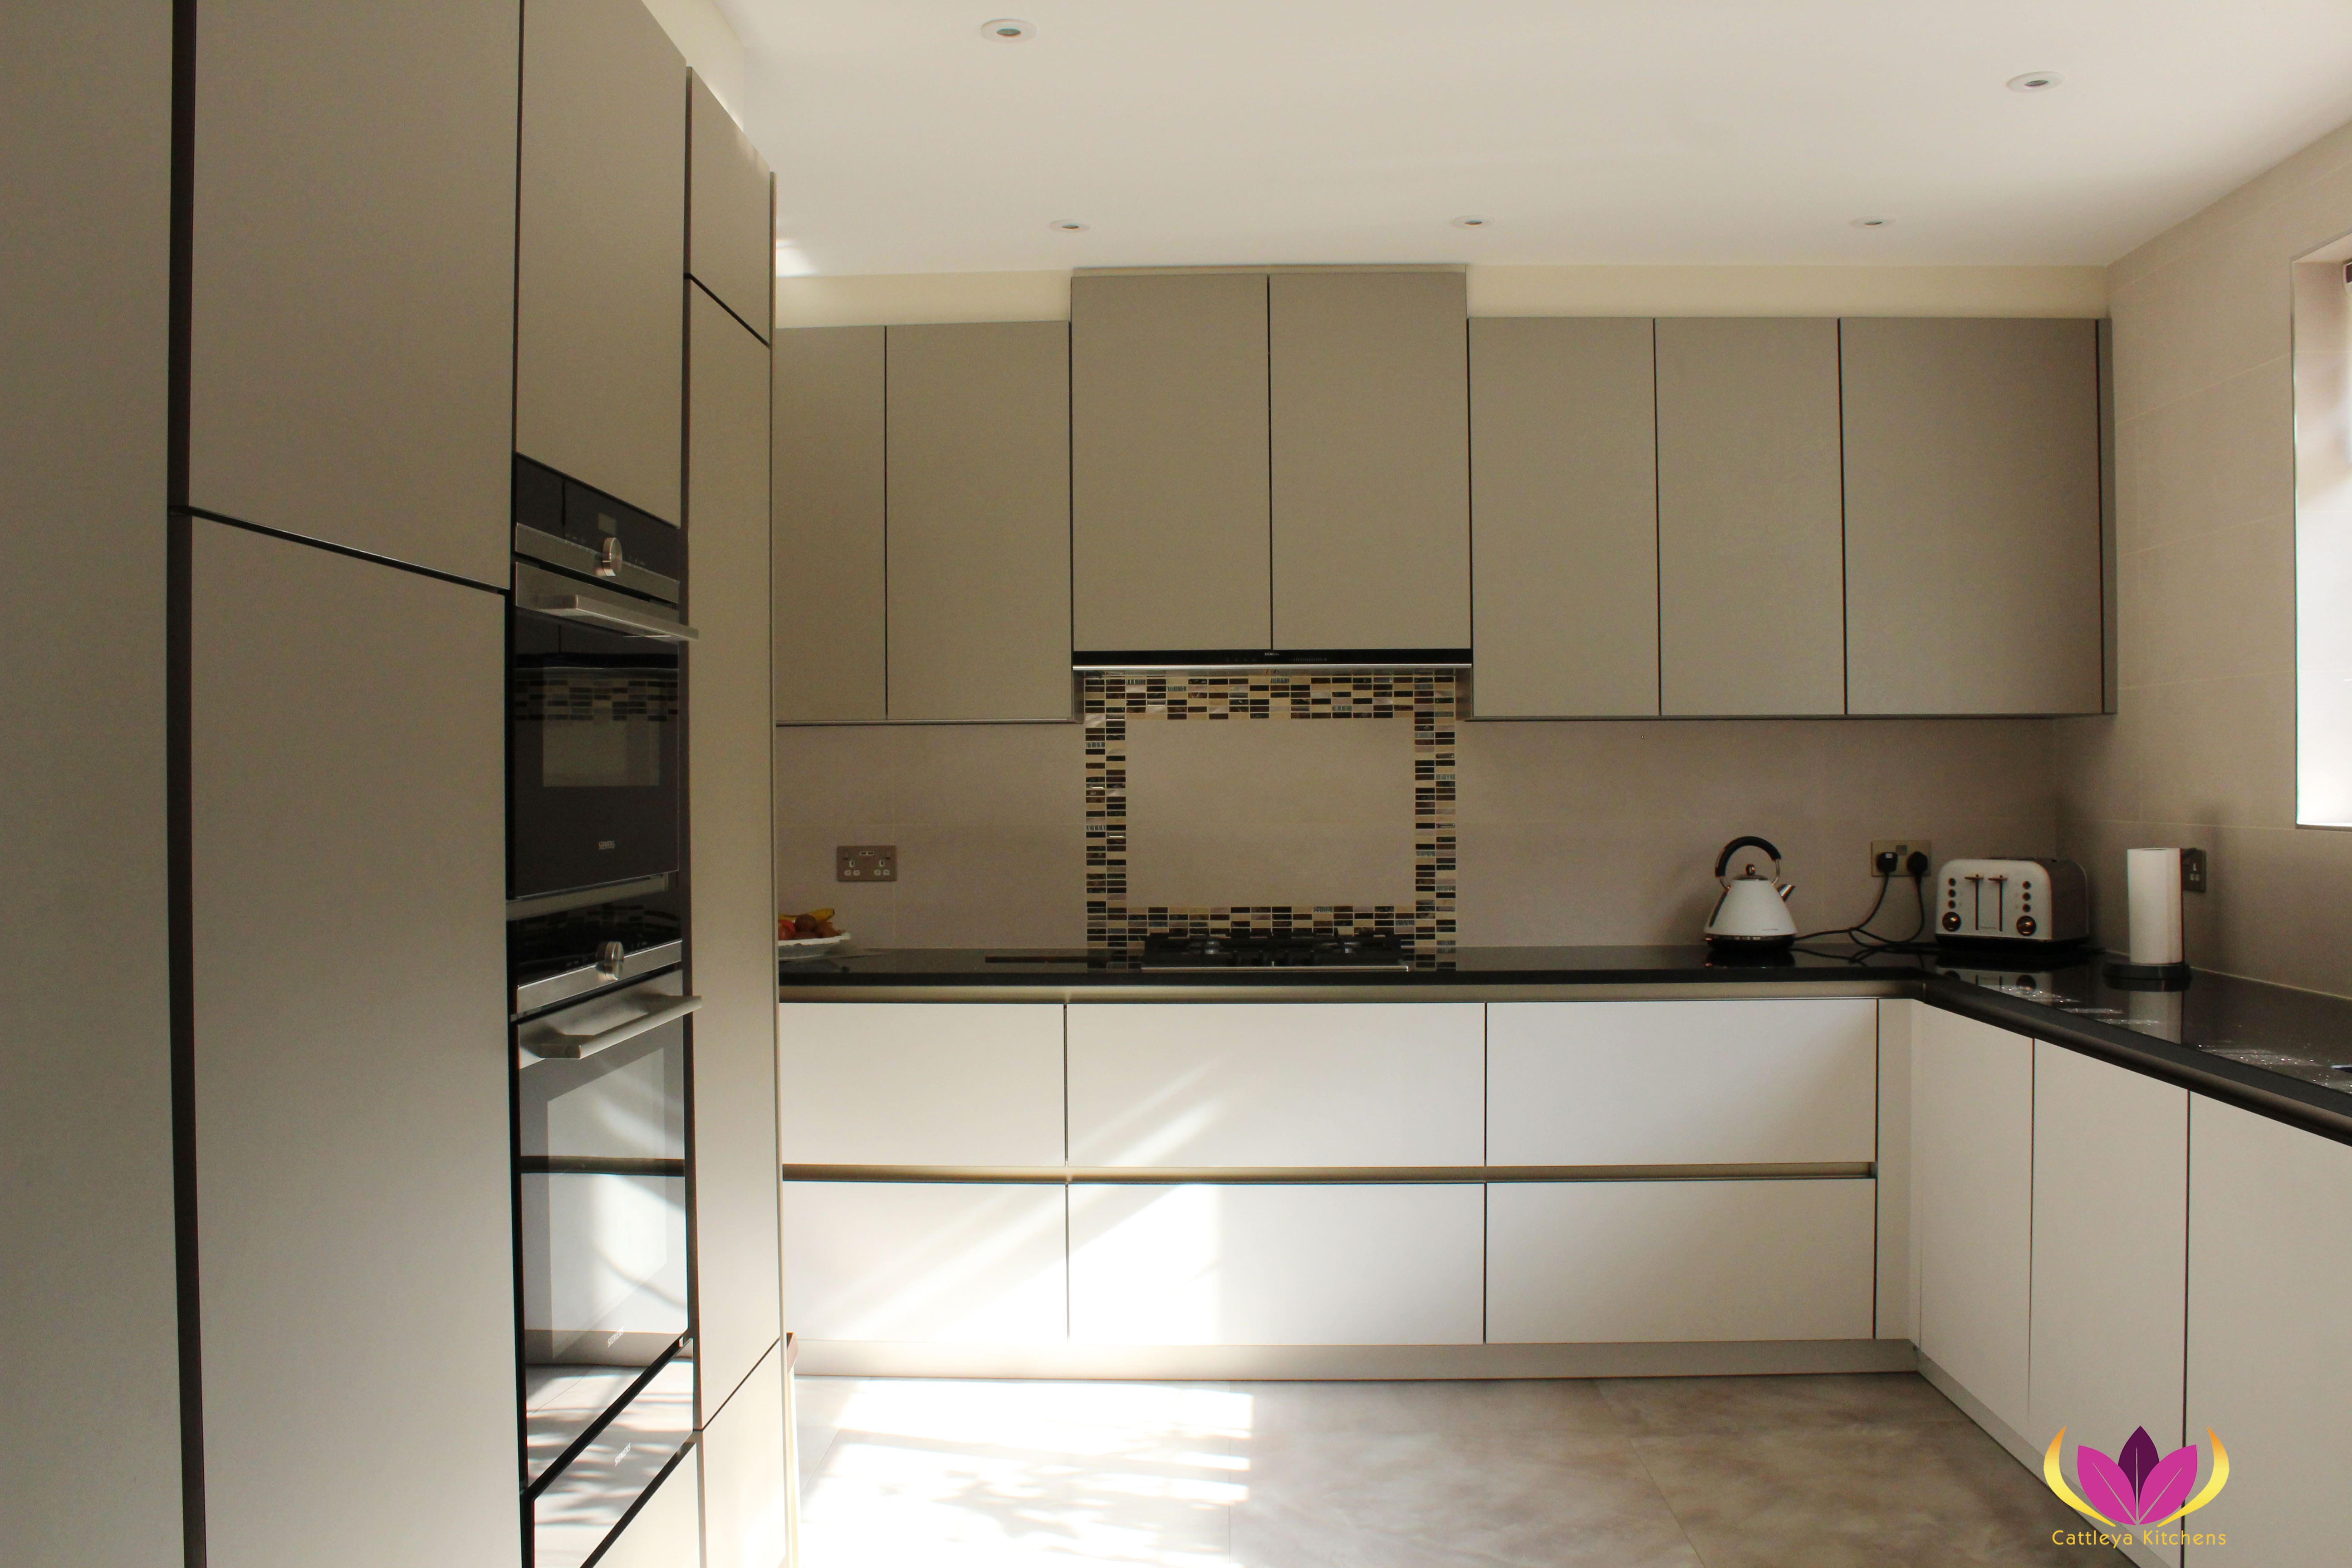 Ealing Finished Kitchen Project